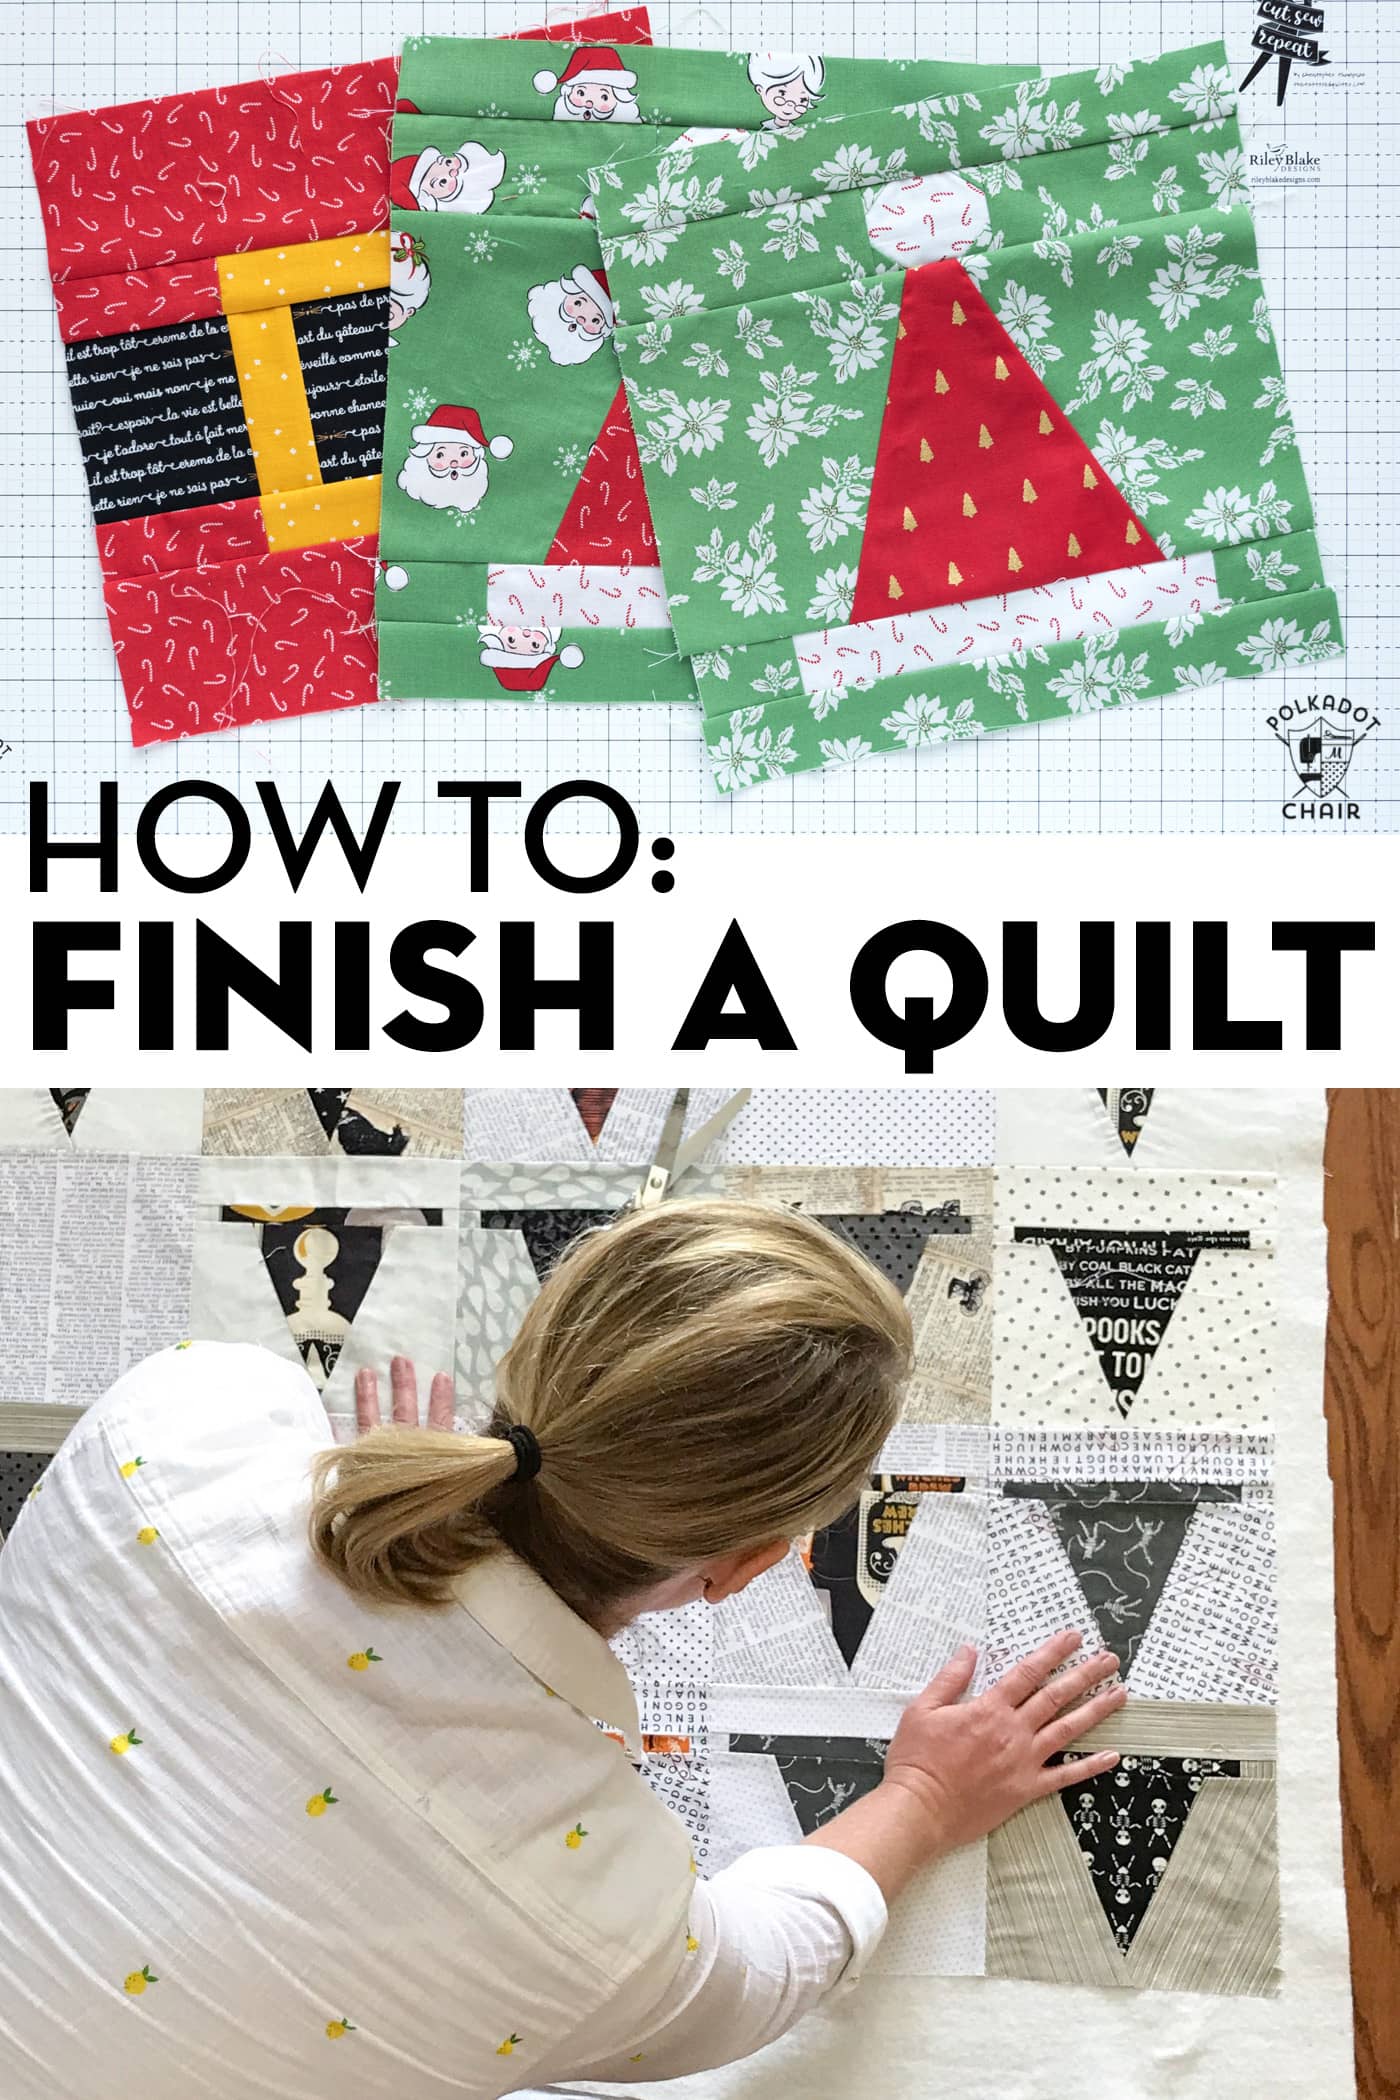 Quilt As You Go Tutorial: A Step By Step Guide For Beginner: Quilt As You Go  Batting (Paperback)